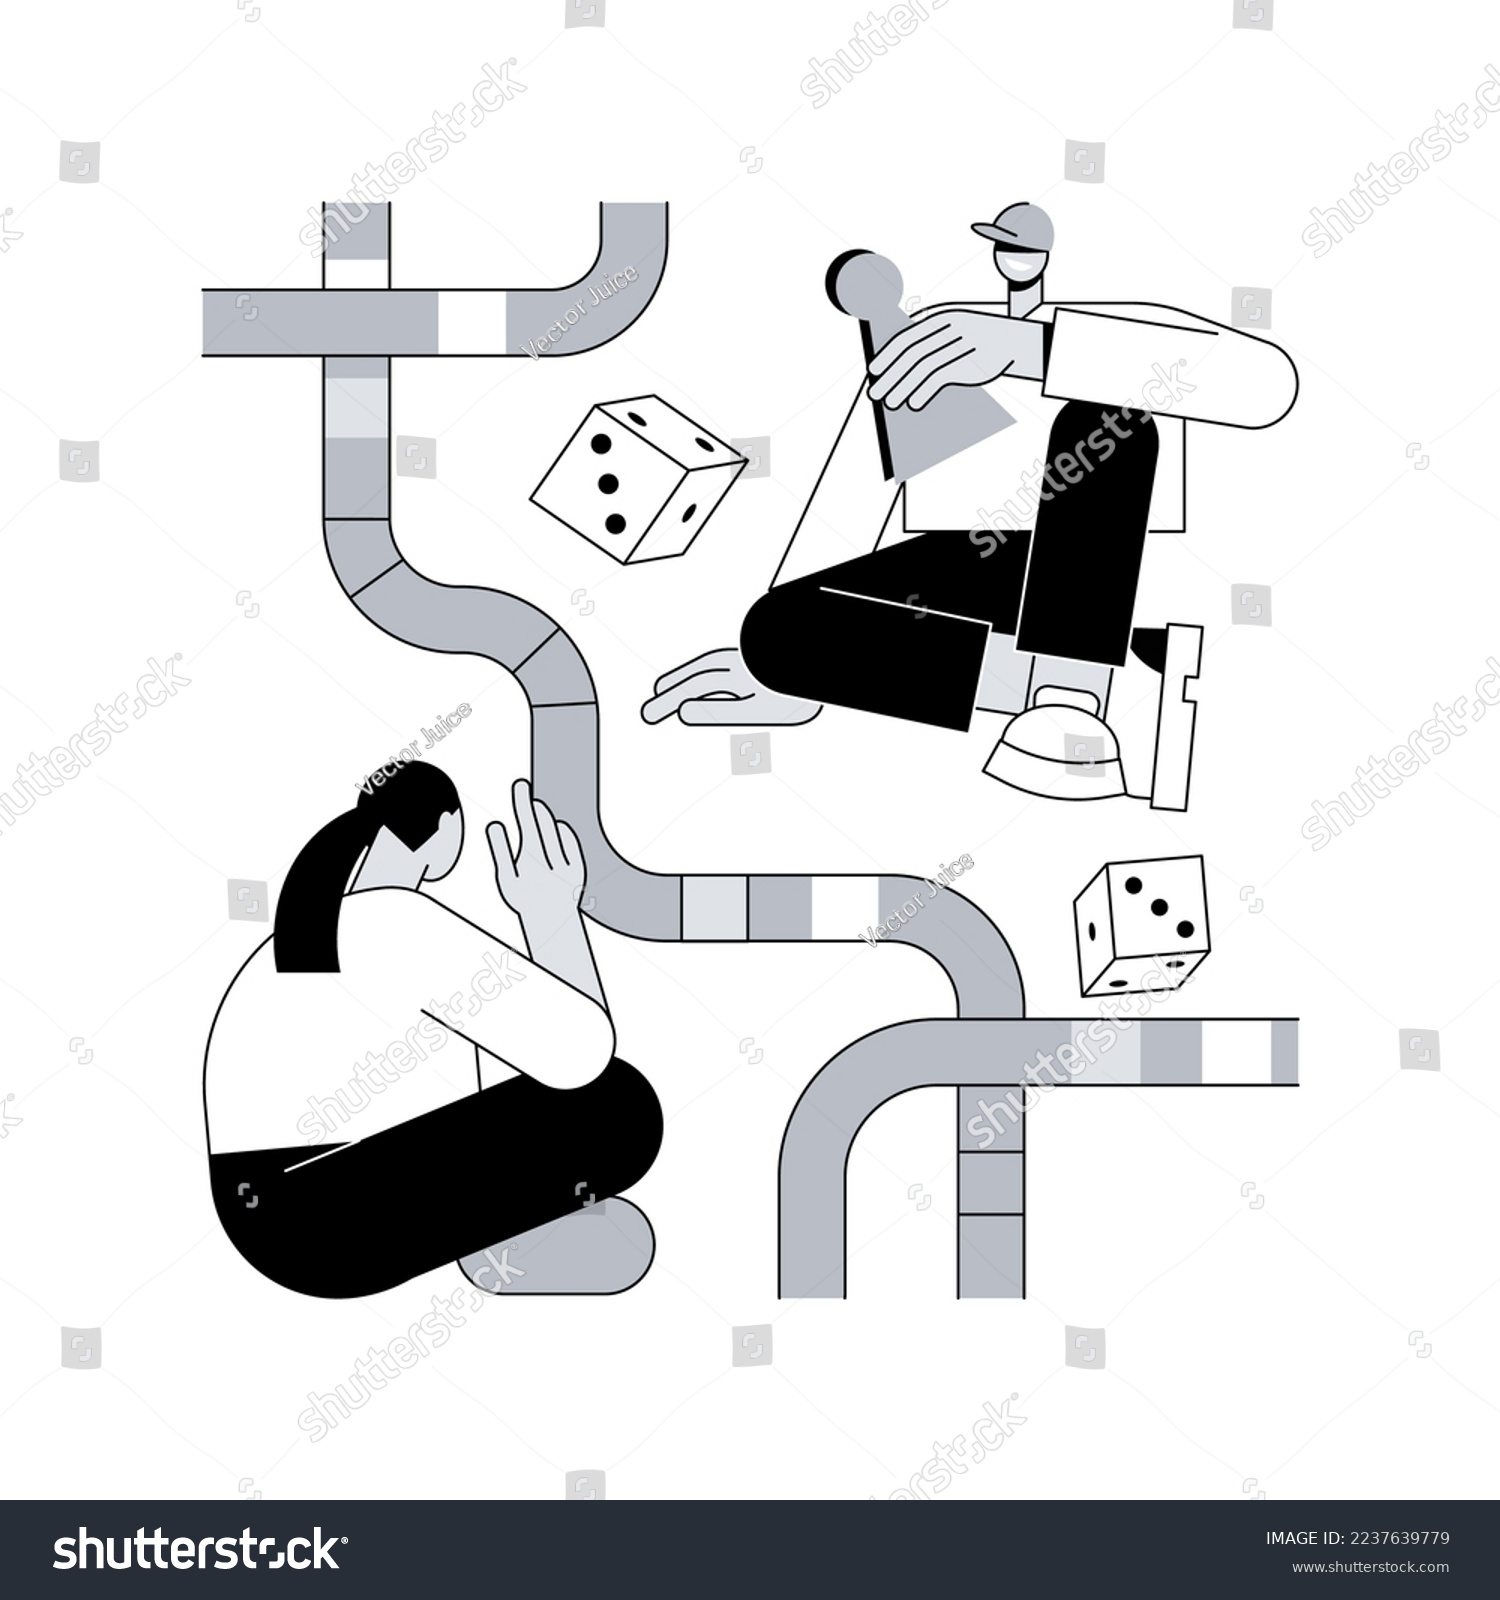 SVG of Board games abstract concept vector illustration. Tabletop activities, strategic gaming, stay at home gamers, social isolation free time spending, family fun activity idea abstract metaphor. svg